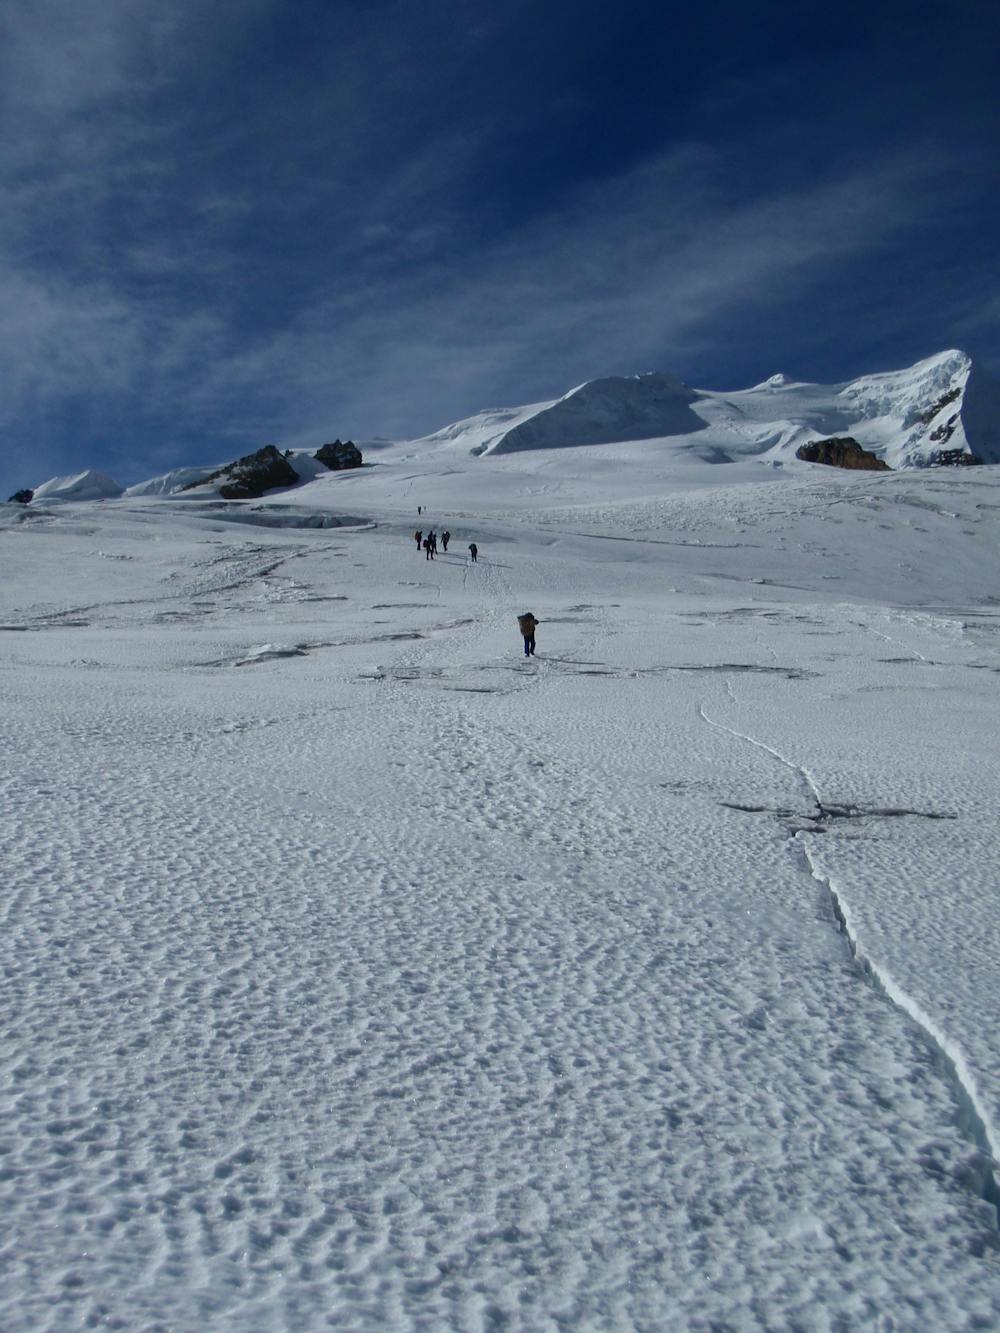 Heading up the lower section of the glacier